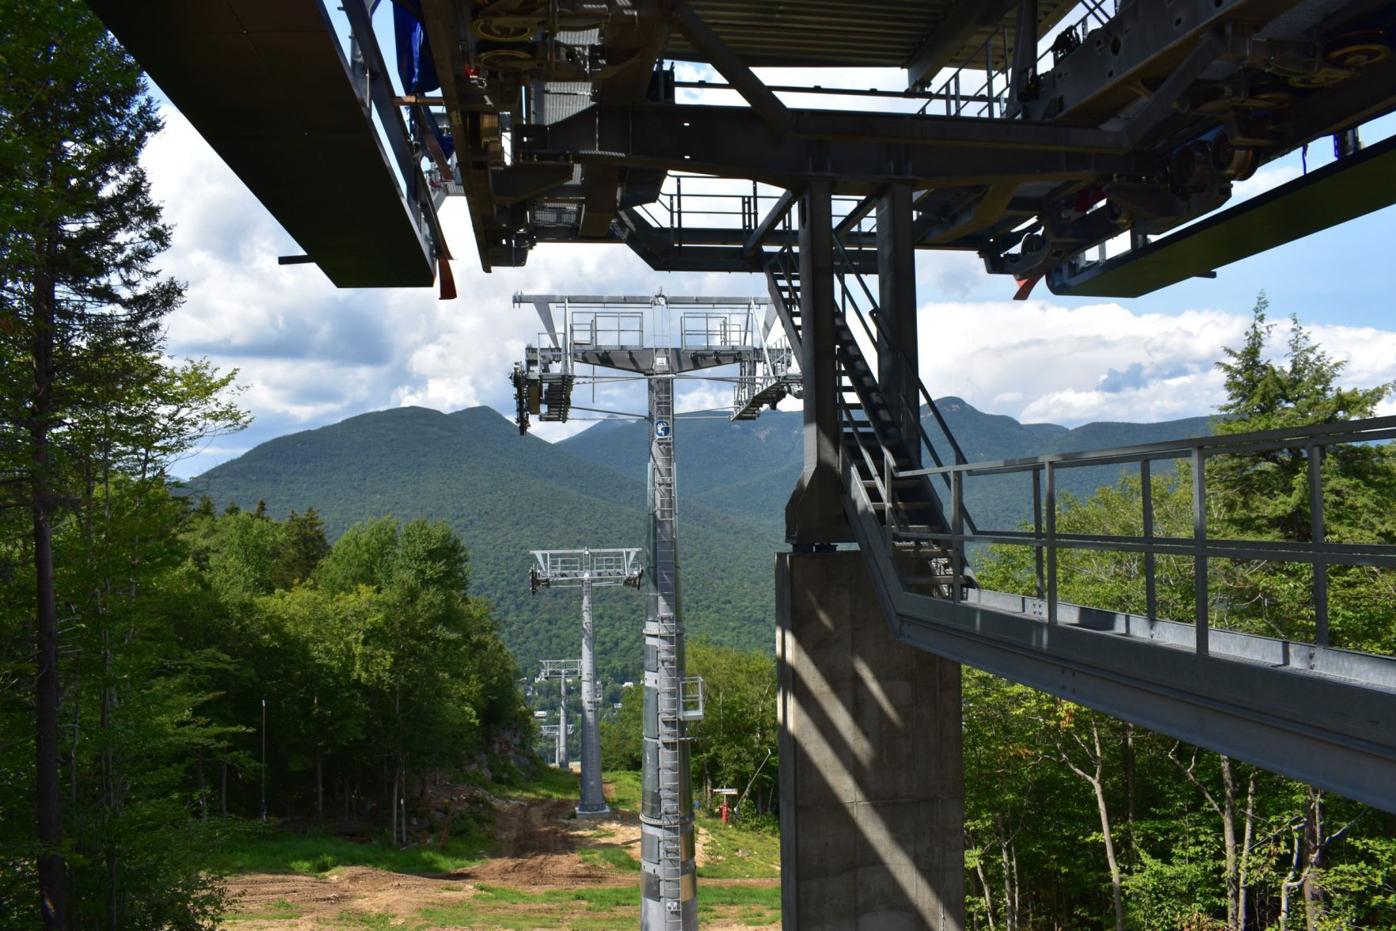 Four-Season Resort: Loon Lift Designed To Transport Bikes As Well As People | Outdoors | Unionleader.com